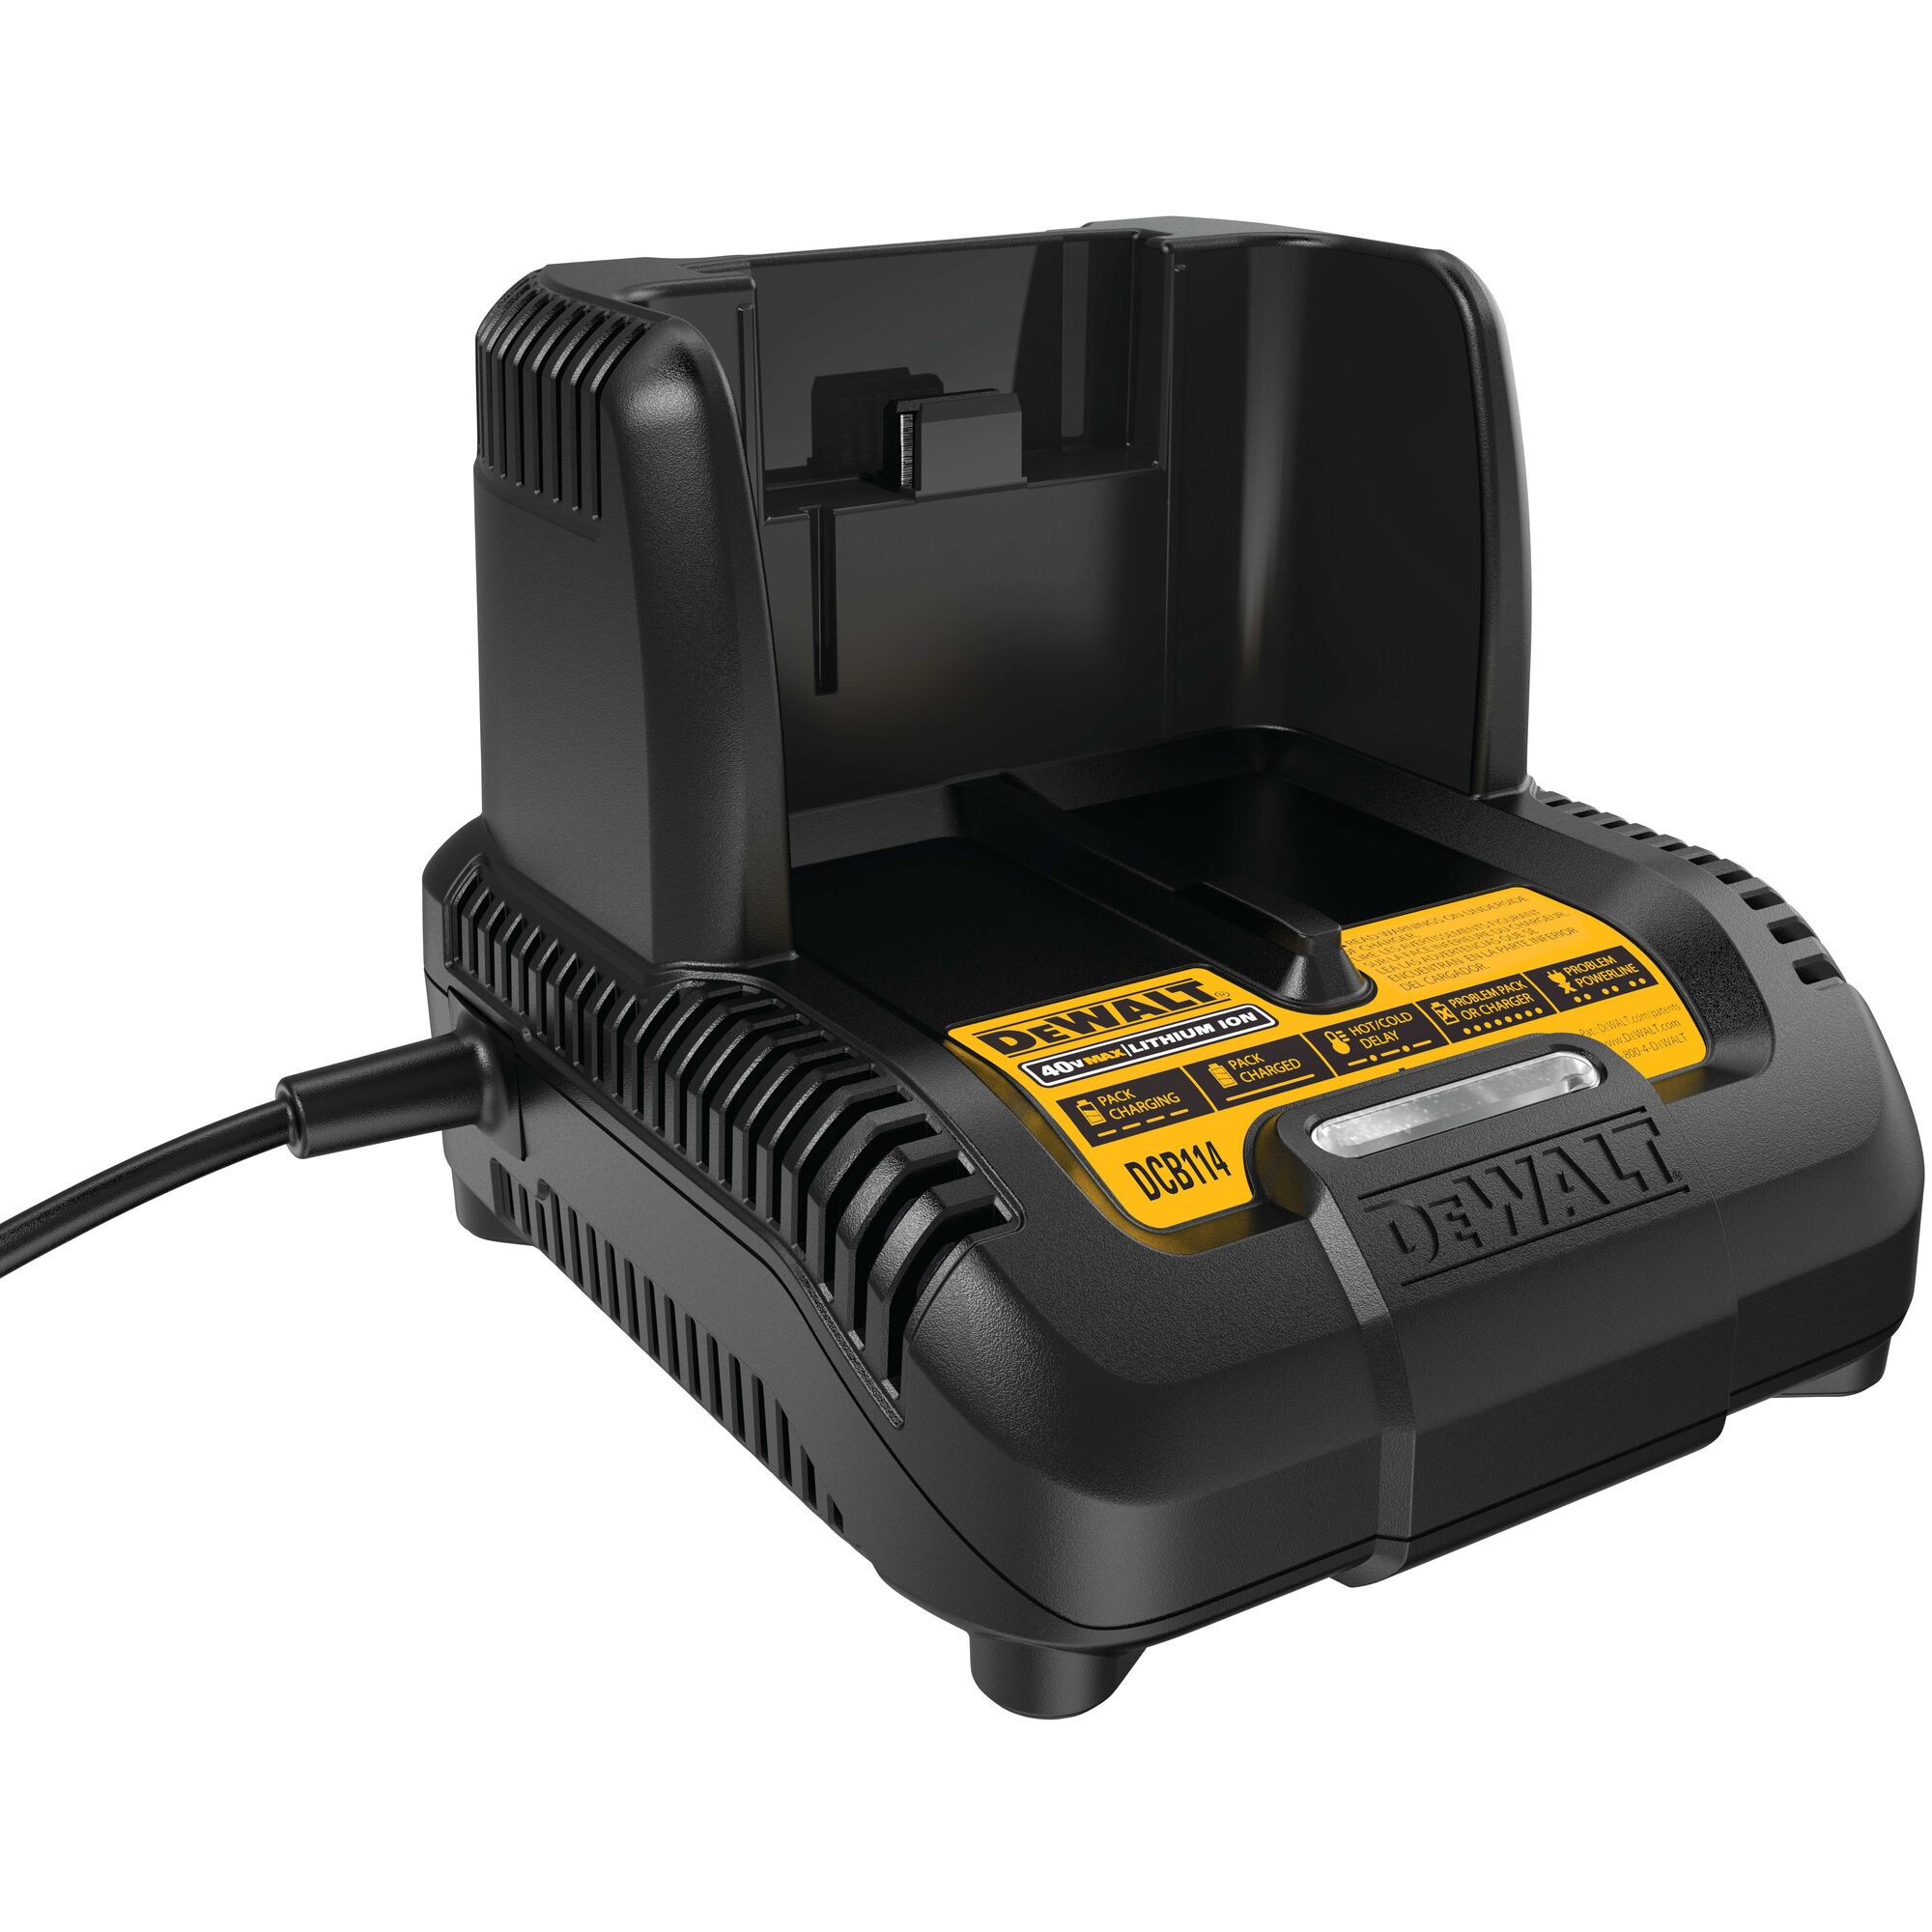 Wall mount for Black + Decker 40V battery and charger